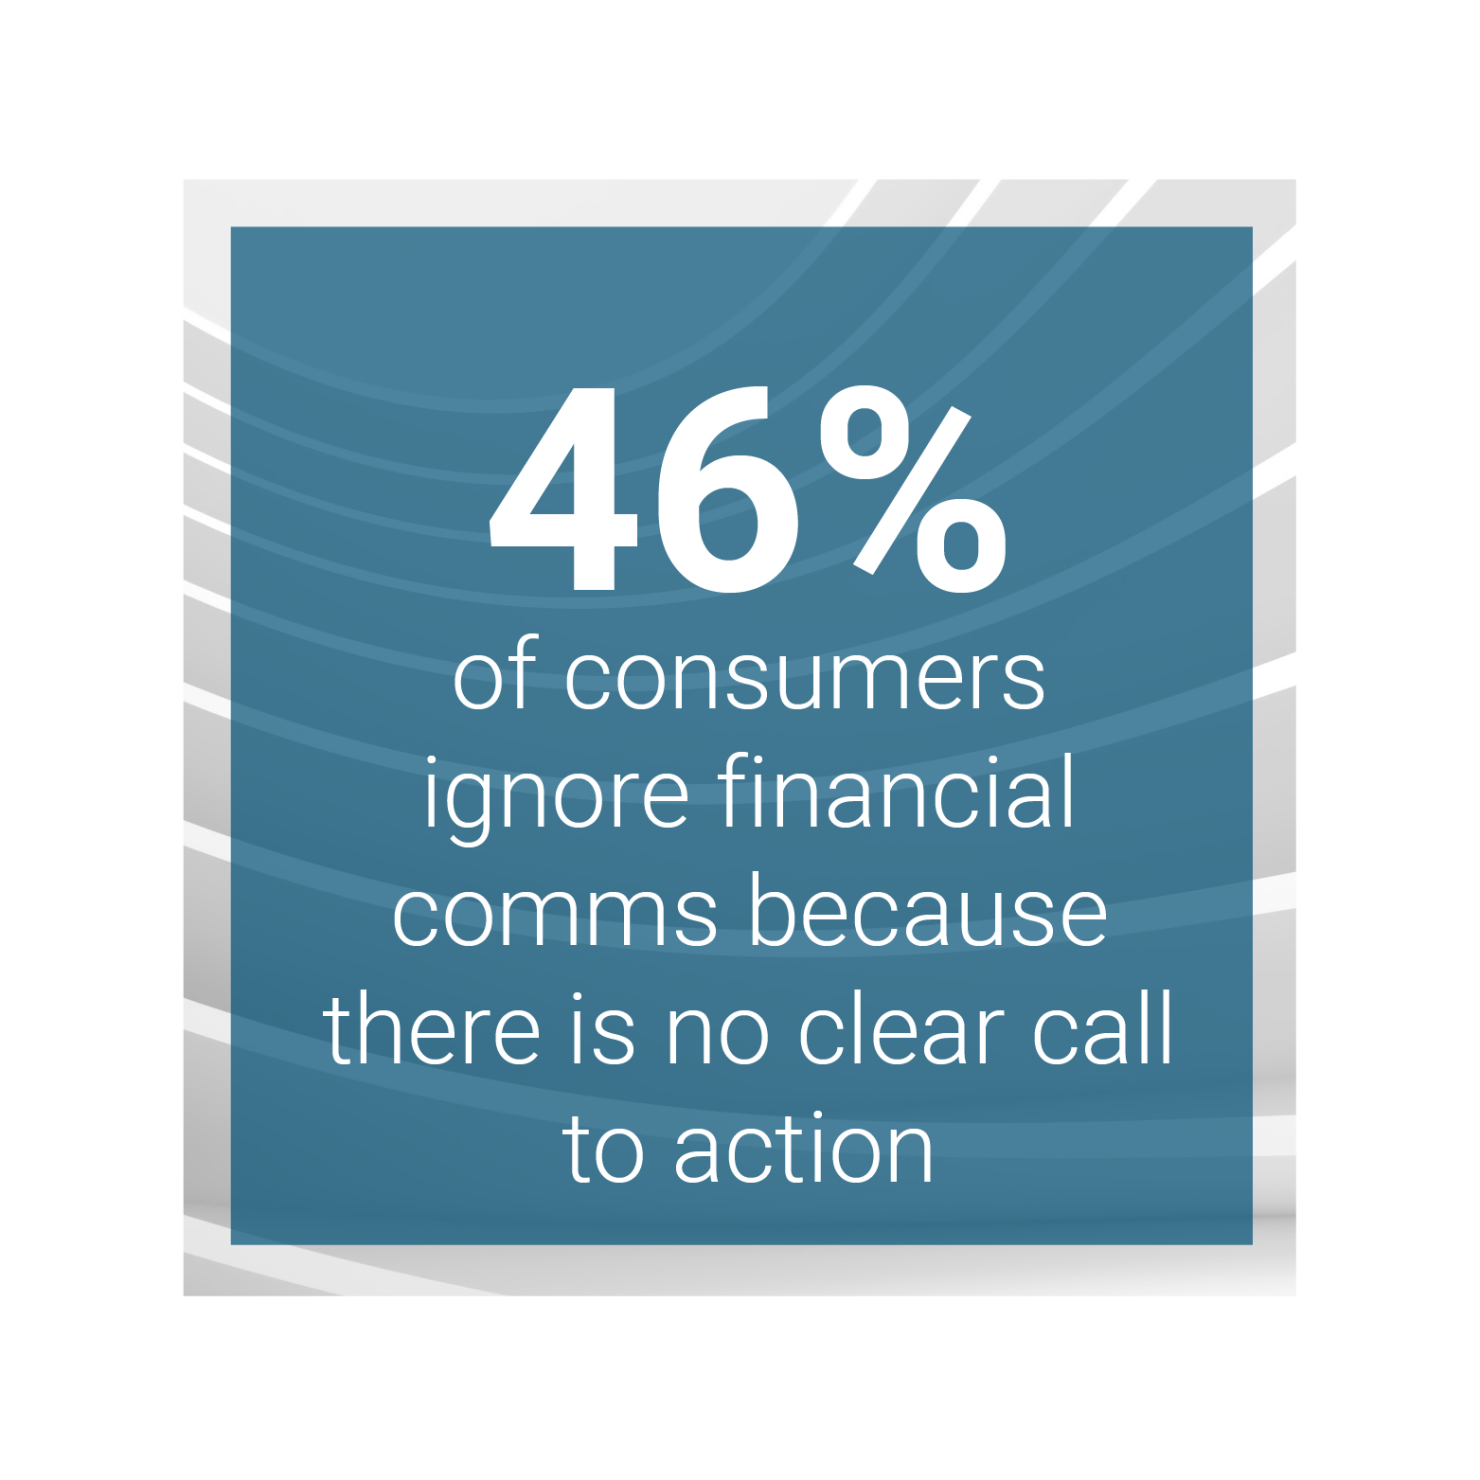 46% of consumers ignore financial comms because there is no clear call to action